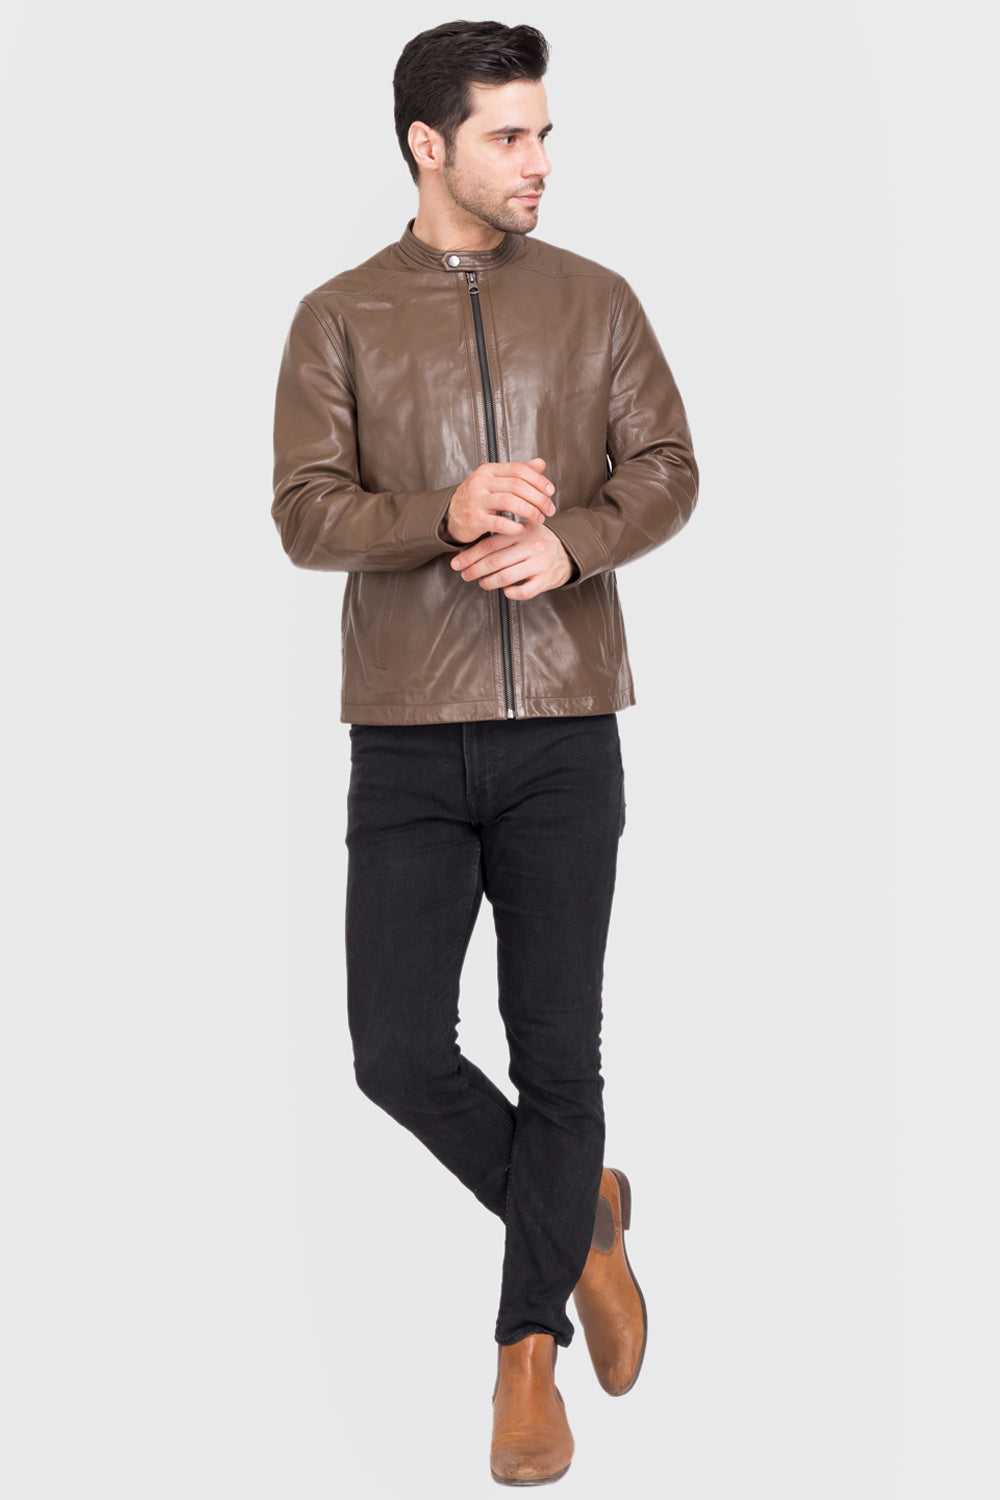 Justanned Wheatish Brown Leather Jacket